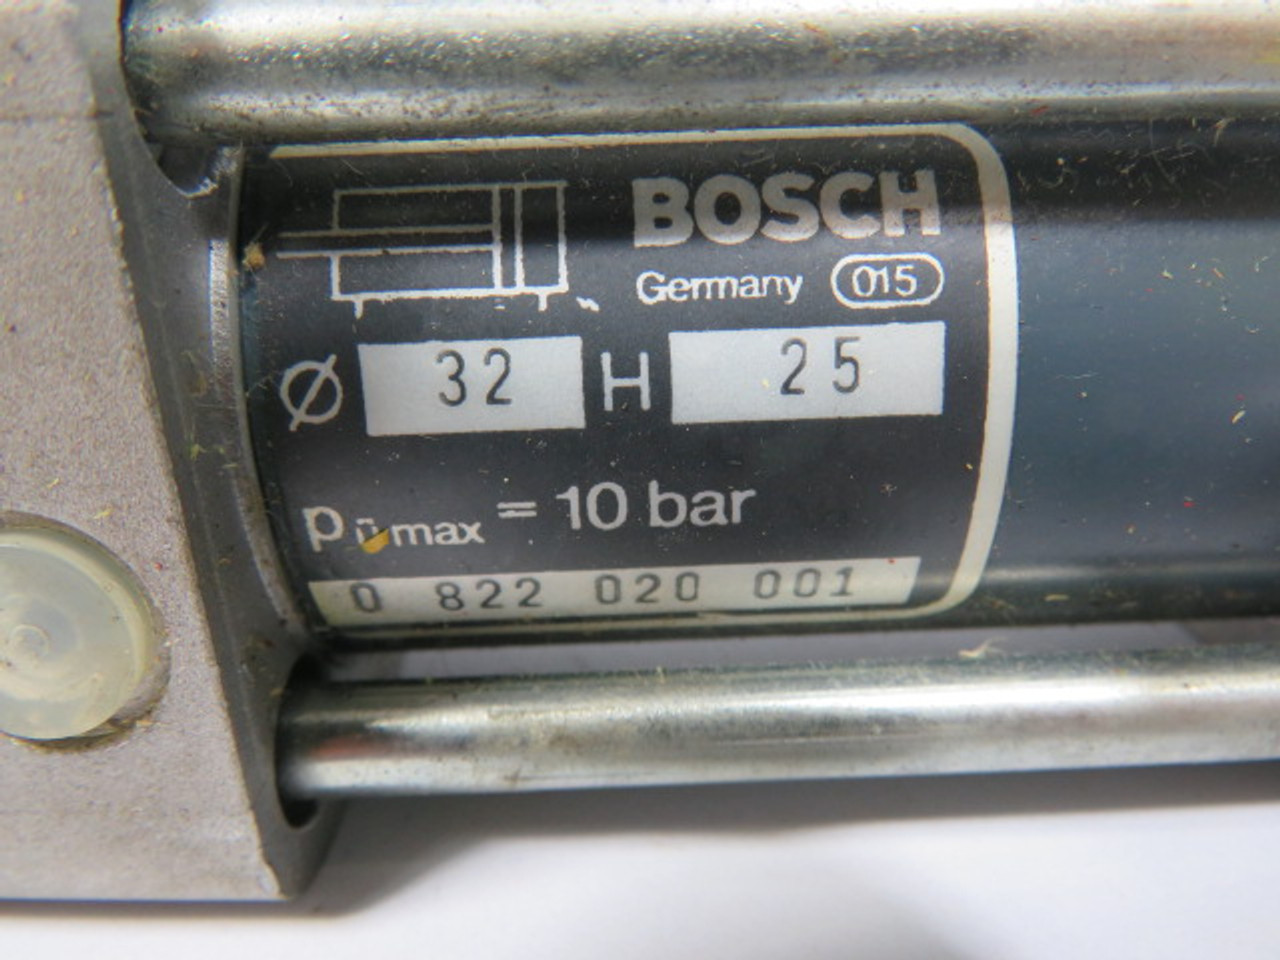 Bosch 0822020001 Pneumatic Cylinder 32mm Bore 25mm Stroke USED